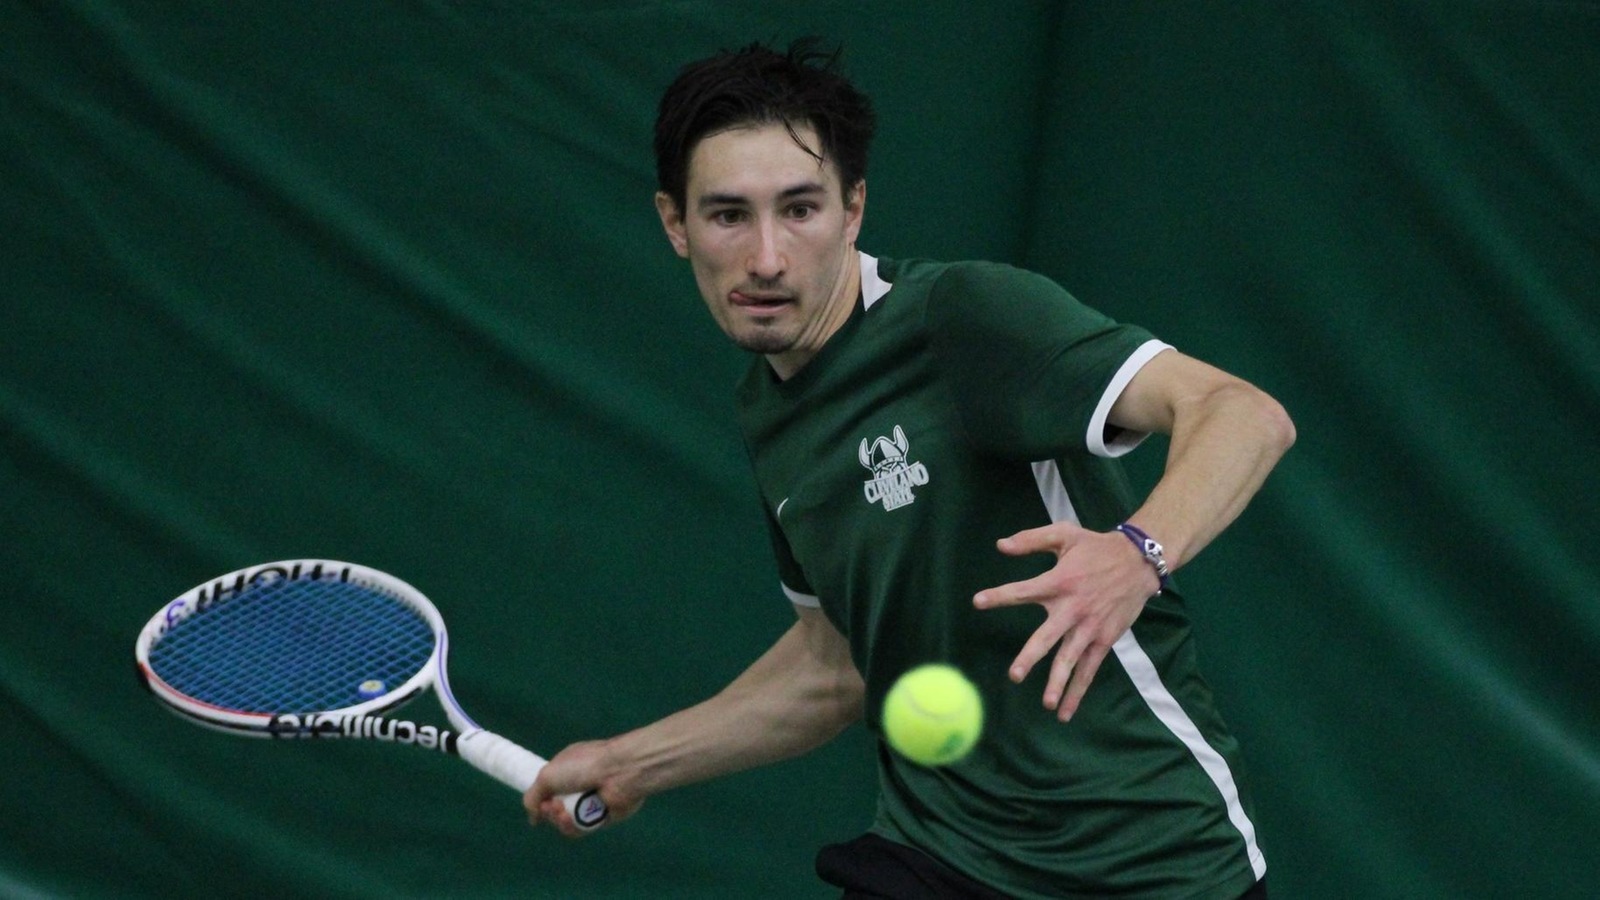 Cleveland State Men’s Tennis Picks Up 5-2 Win At Youngstown State In #HLTennis Opener